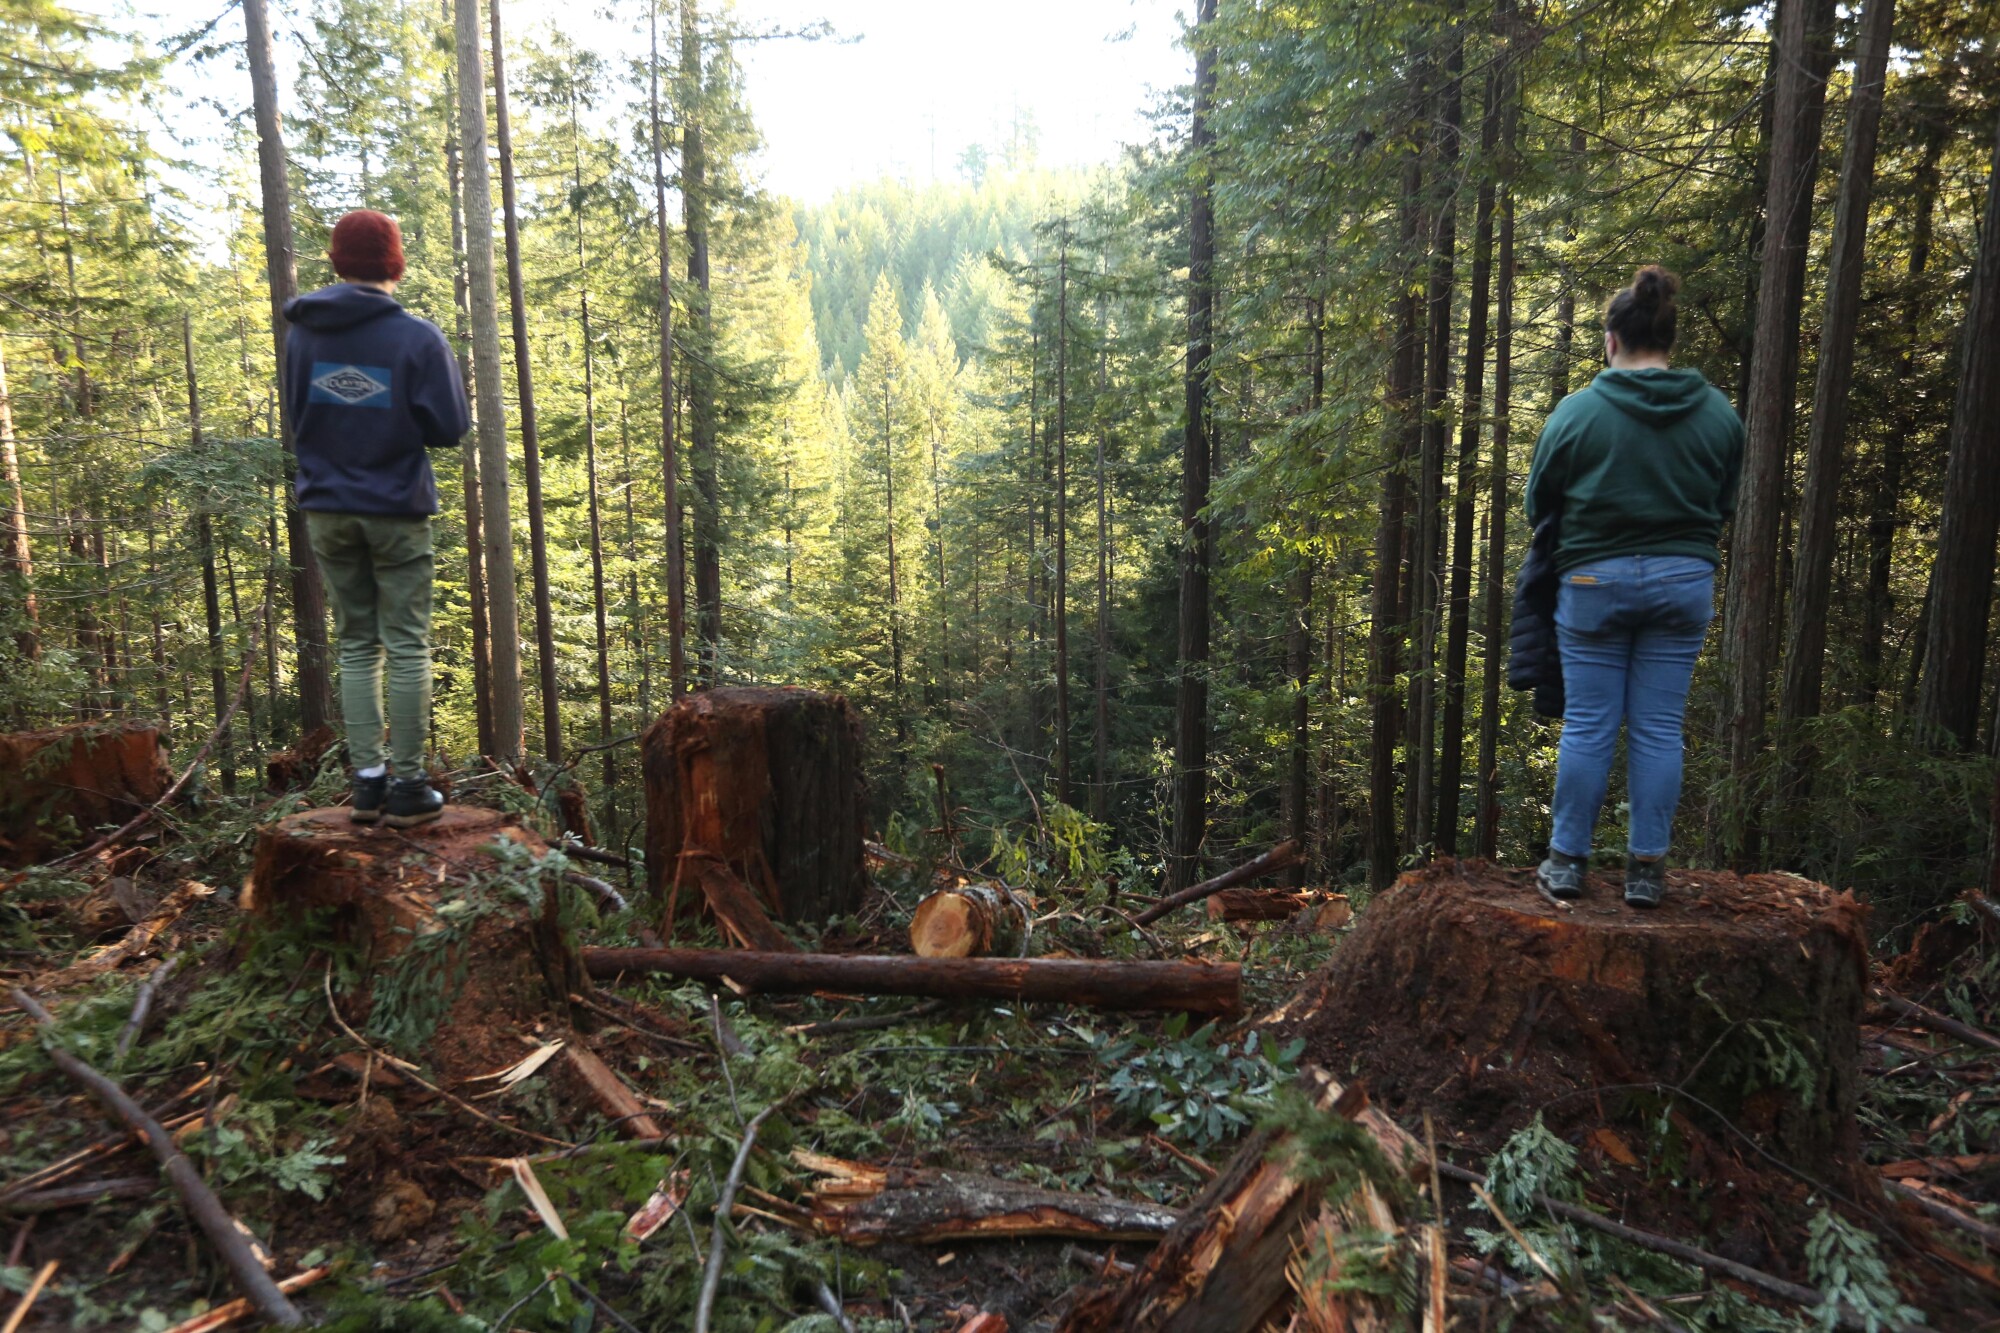 Youth activists stand on the stumps of fallen redwood trees in Jackson Demonstration State Forest